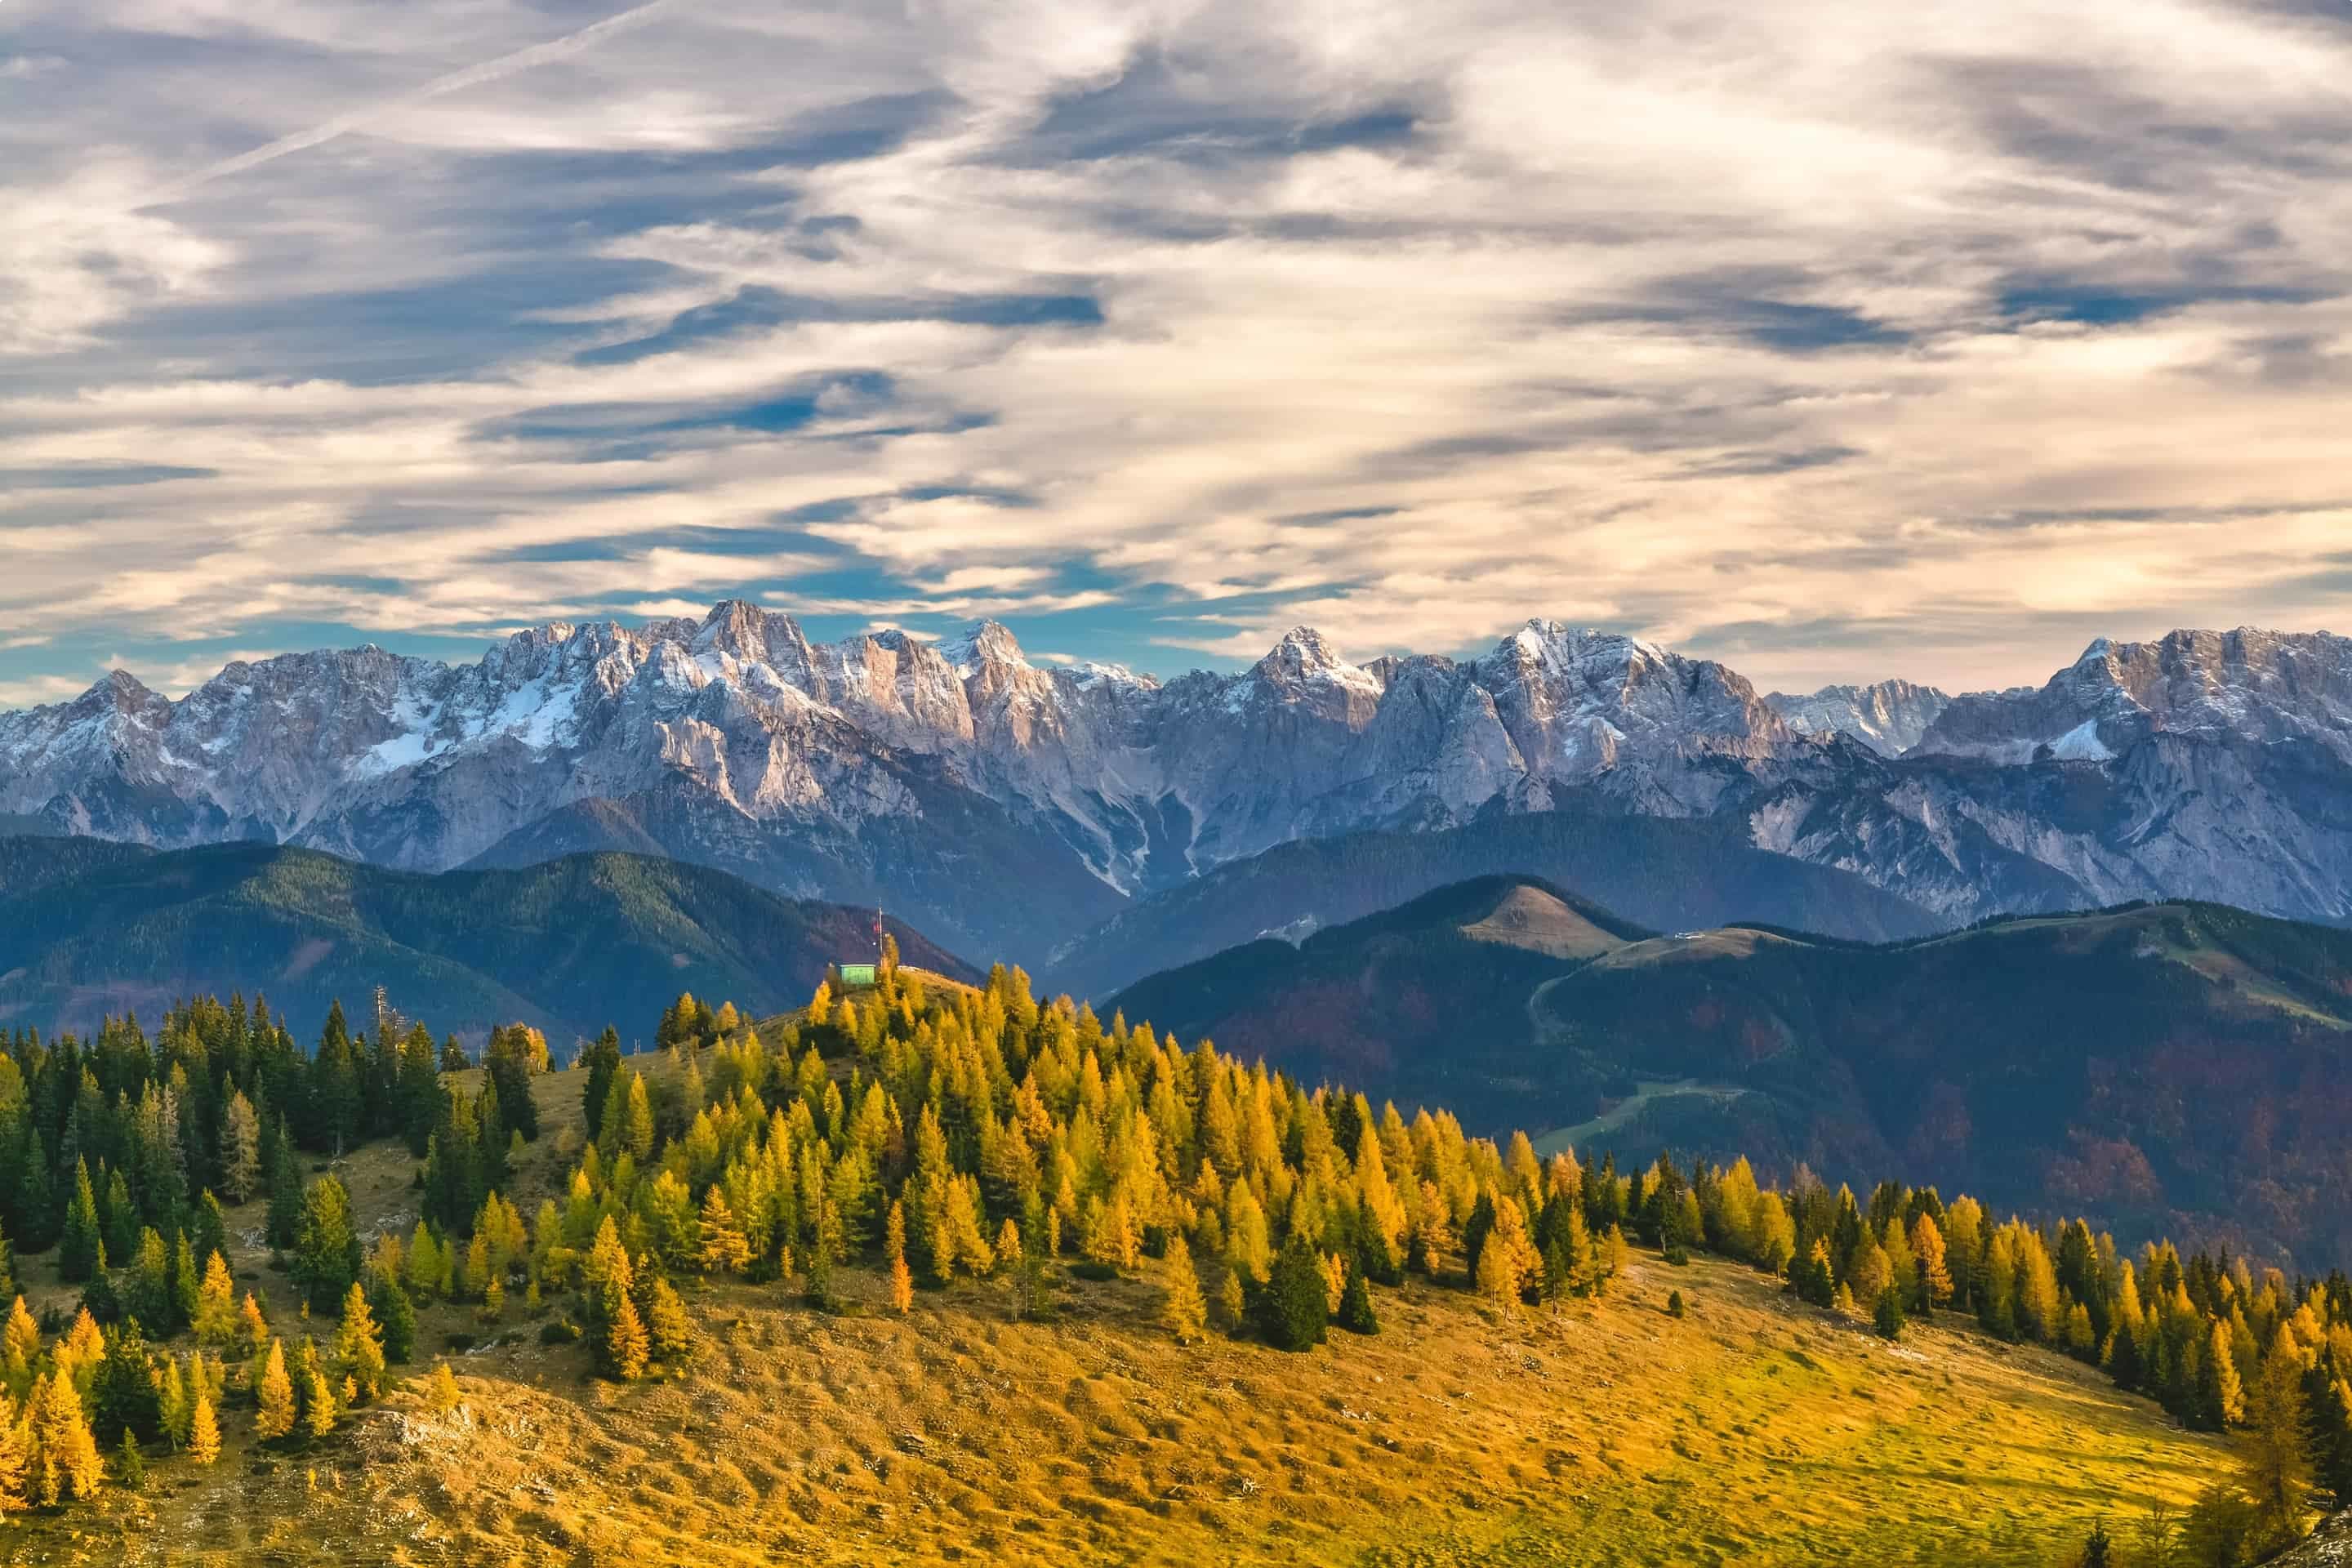 View of the Alps in Austria